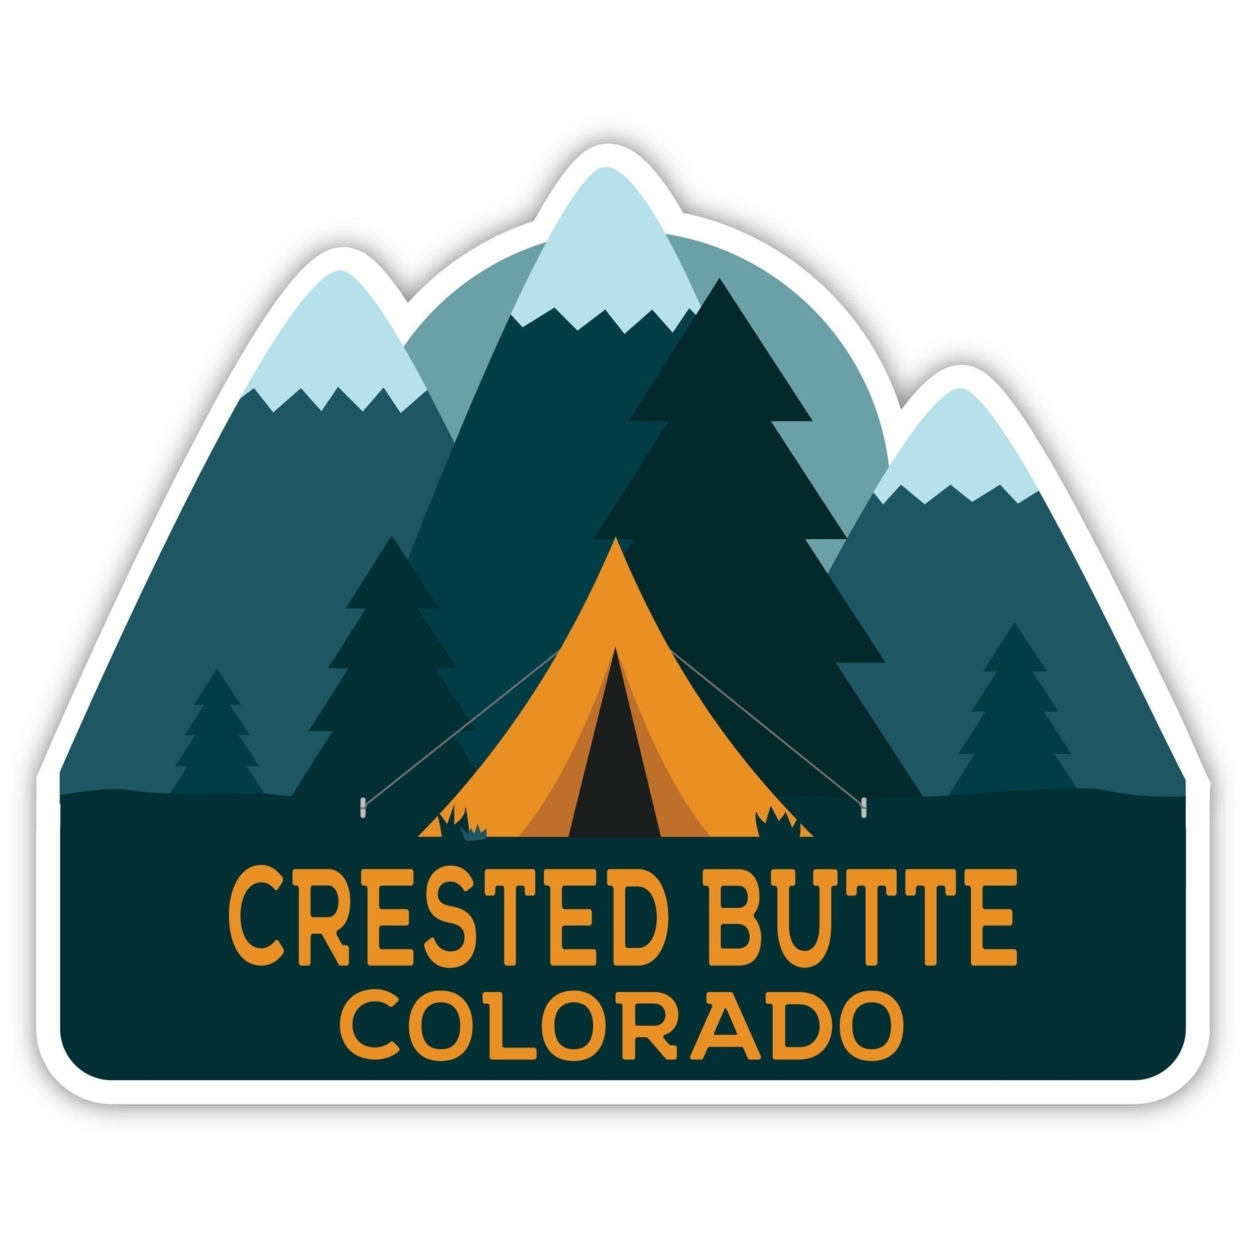 Crested Butte Colorado Souvenir Decorative Stickers (Choose Theme And Size) - 4-Pack, 4-Inch, Camp Life